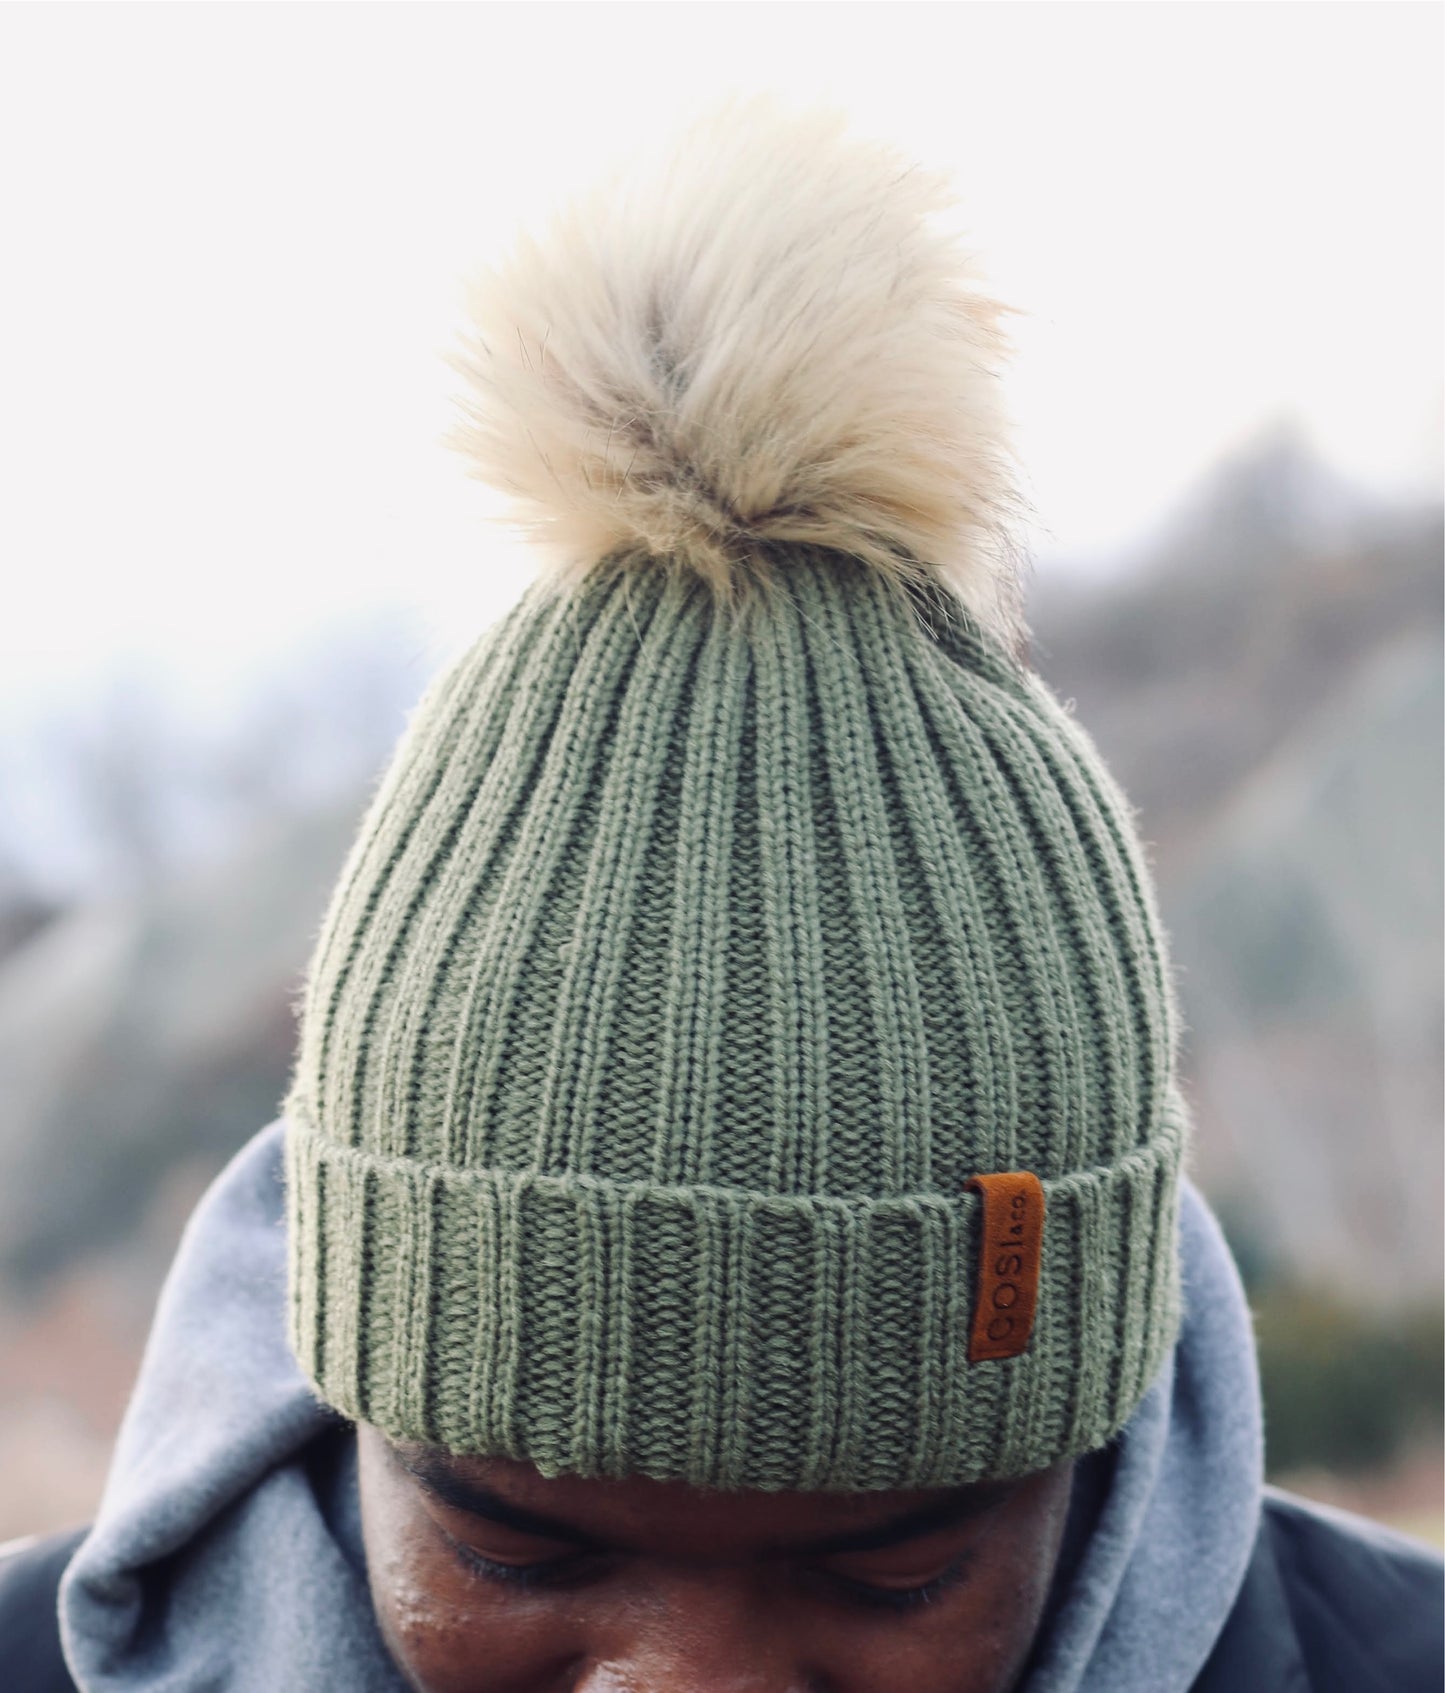 The Knit Pom in Olive Green - COSI & co.